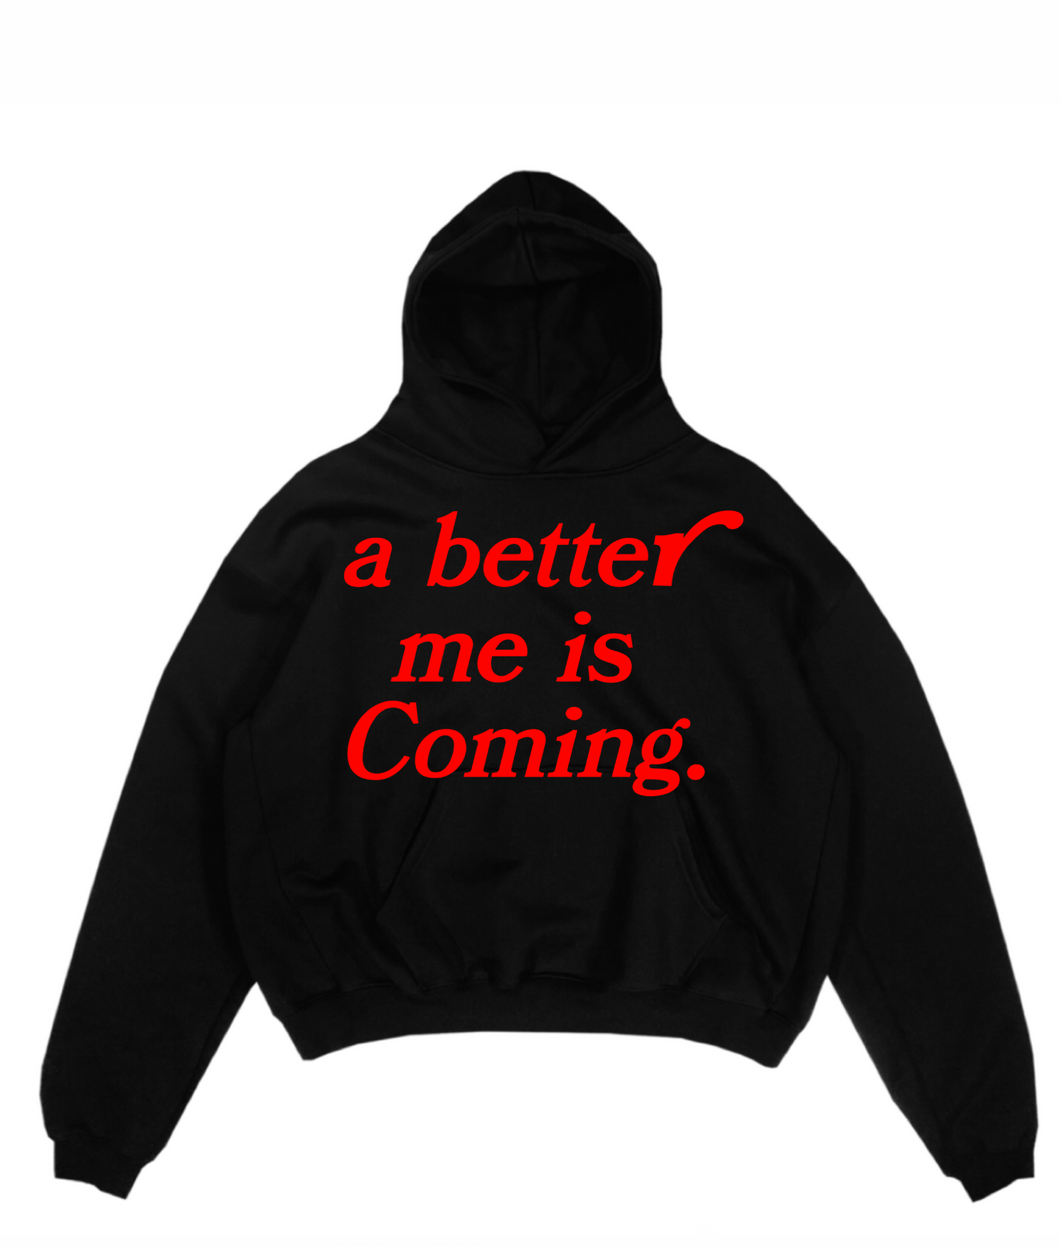 A better me is coming - Black / Red Hoodie